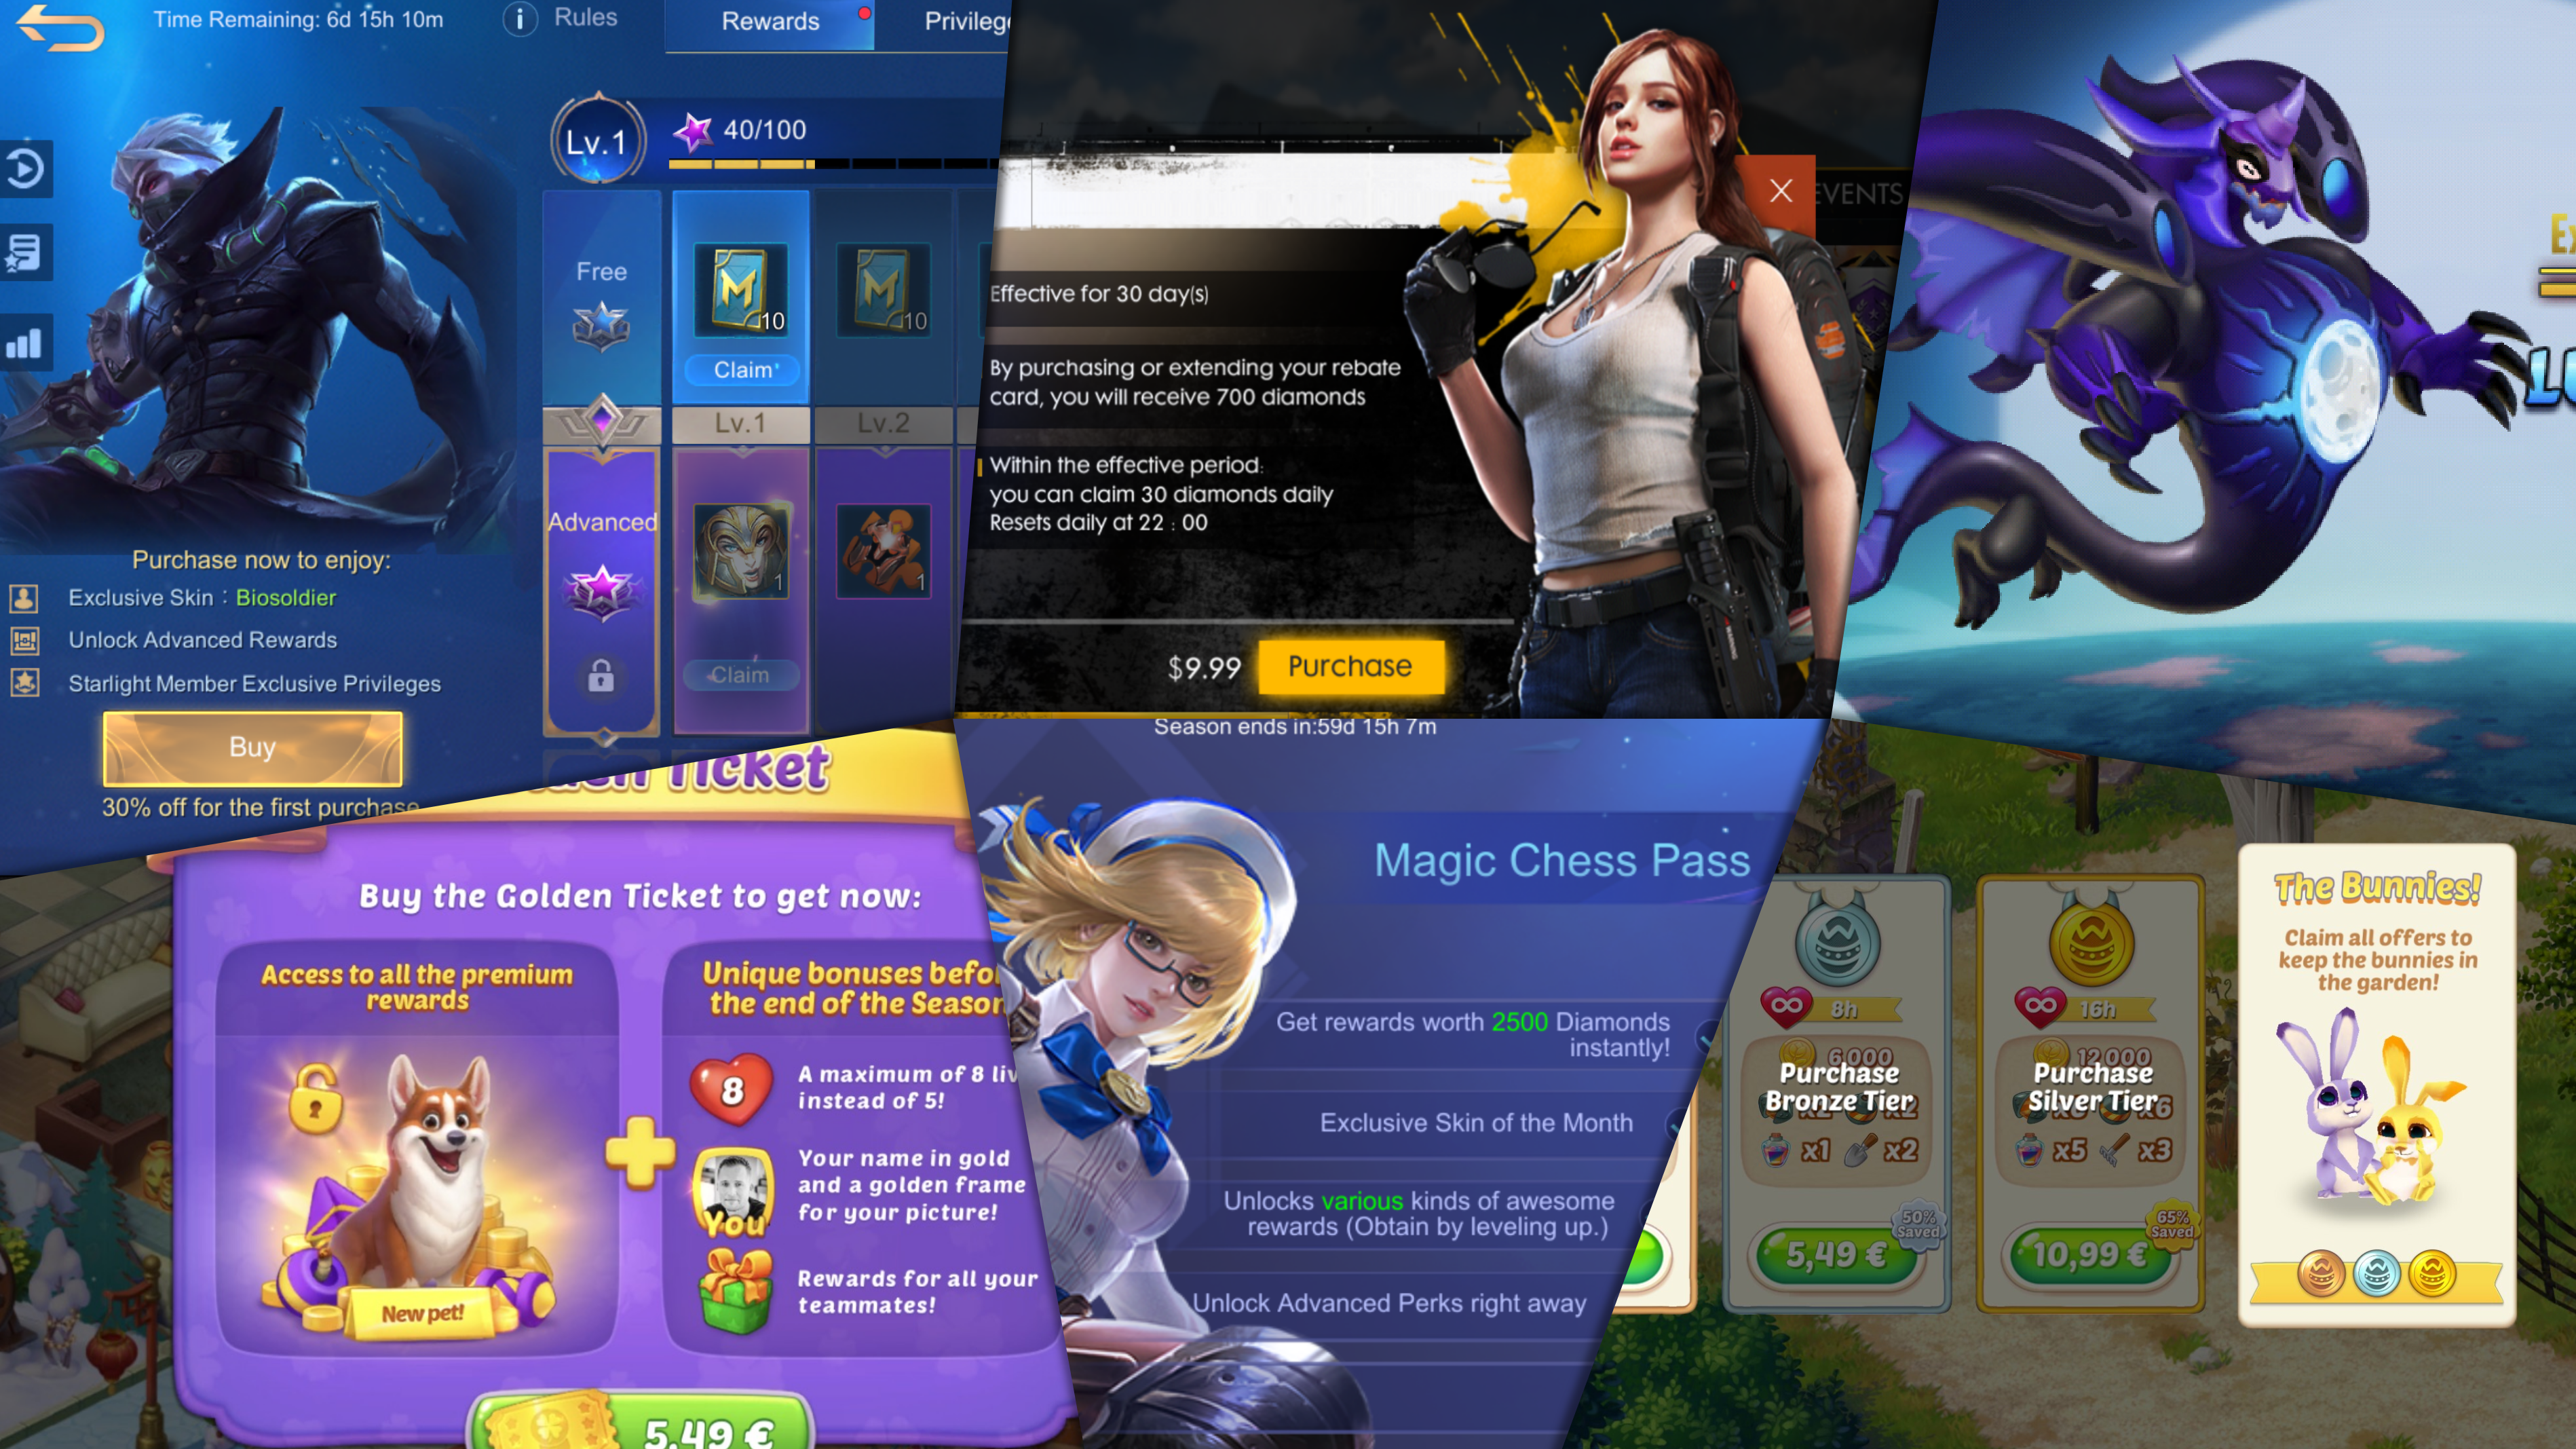 Boost mobile game monetization and player engagement with web shops